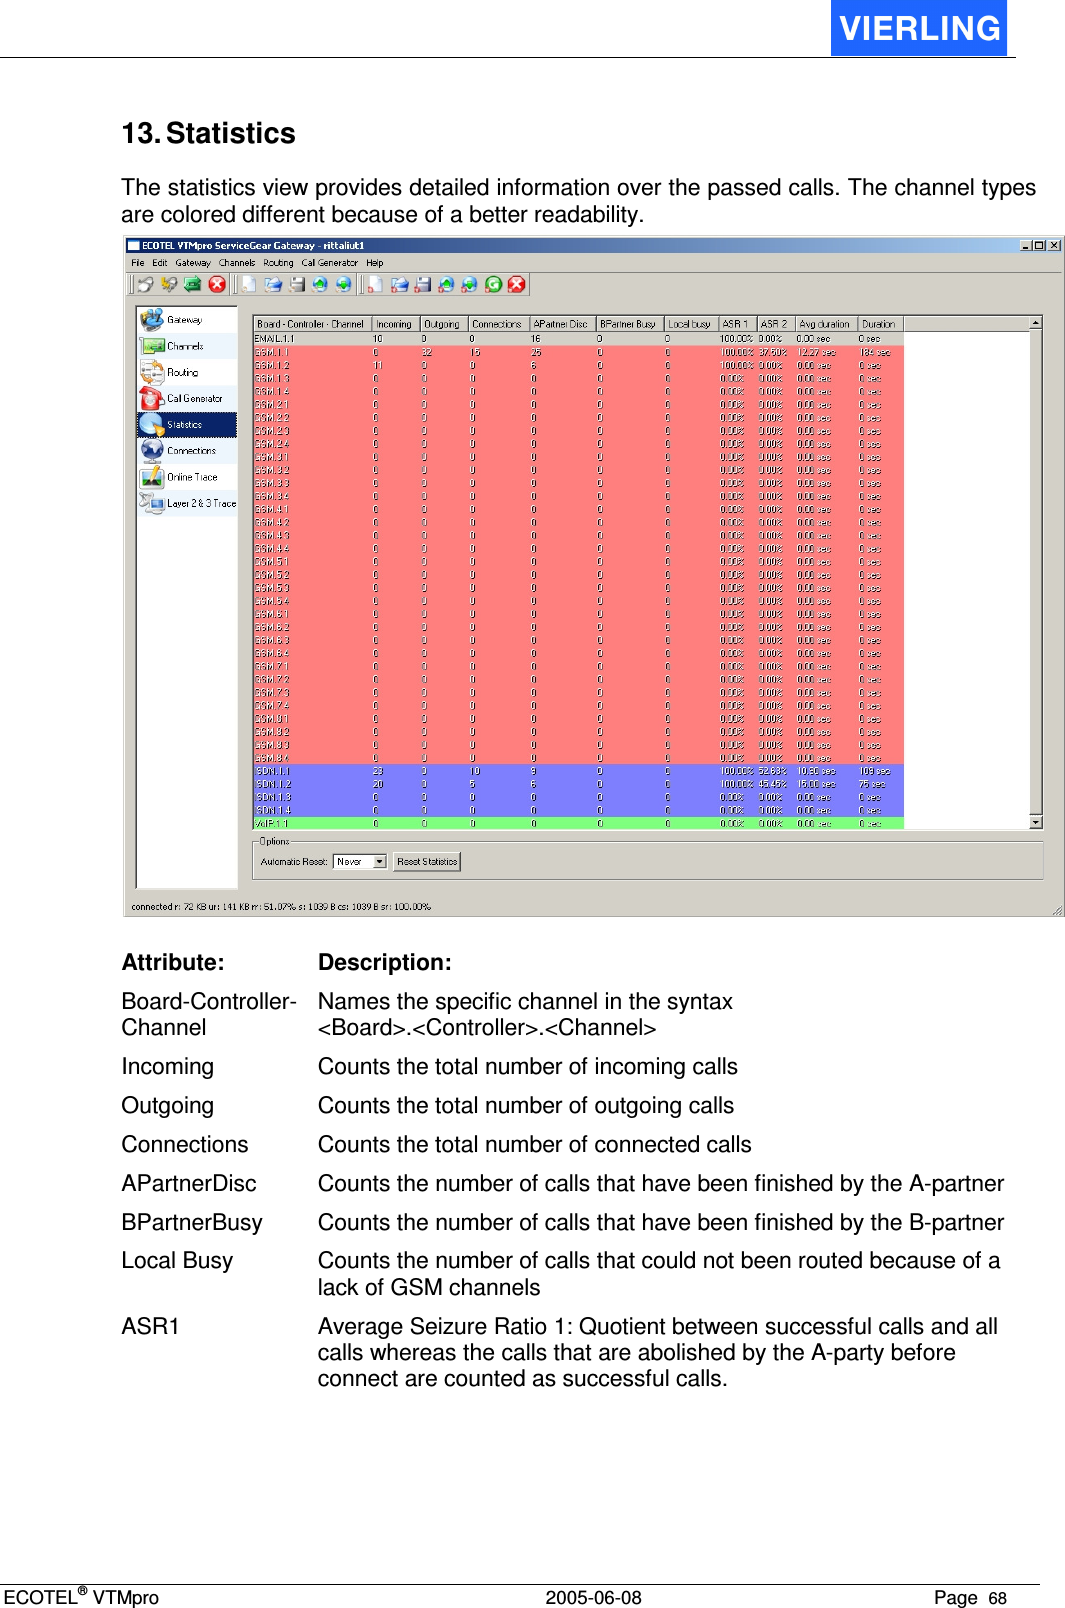 ECOTEL® VTMpro  2005-06-08 Page  68    13. Statistics The statistics view provides detailed information over the passed calls. The channel types are colored different because of a better readability.   Attribute:  Description: Board-Controller-Channel Names the specific channel in the syntax &lt;Board&gt;.&lt;Controller&gt;.&lt;Channel&gt; Incoming  Counts the total number of incoming calls Outgoing  Counts the total number of outgoing calls Connections  Counts the total number of connected calls APartnerDisc  Counts the number of calls that have been finished by the A-partner BPartnerBusy  Counts the number of calls that have been finished by the B-partner Local Busy  Counts the number of calls that could not been routed because of a lack of GSM channels ASR1  Average Seizure Ratio 1: Quotient between successful calls and all calls whereas the calls that are abolished by the A-party before connect are counted as successful calls. 